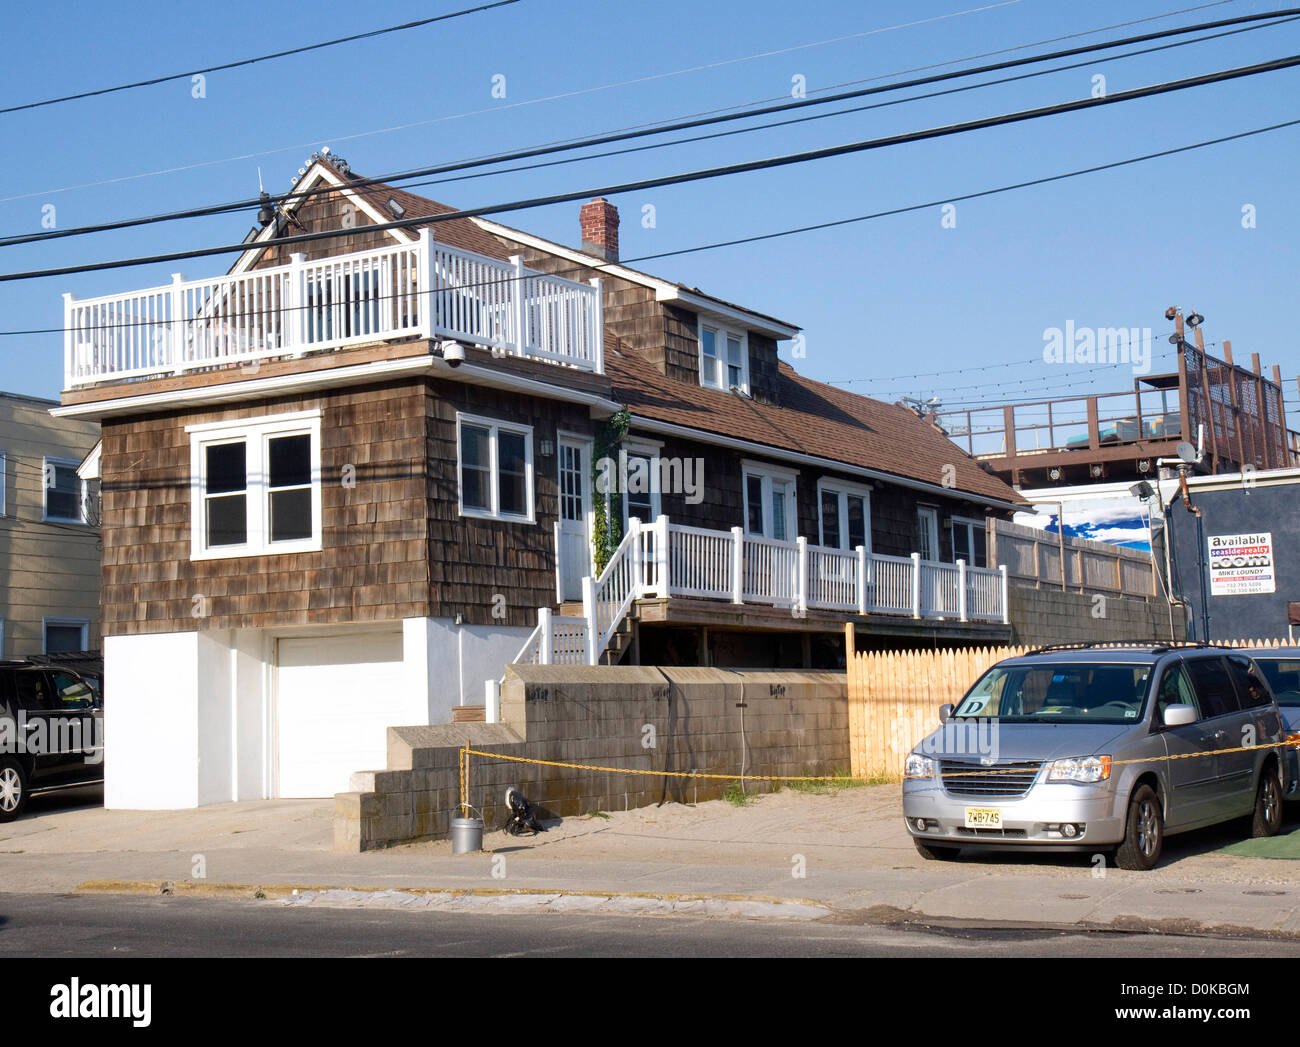 Vijf Mark suspensie The 'Jersey Shore' house The cast of MTV's 'Jersey Shore' on location  filming Seaside Heights, New Jersey - 19.08.10 Stock Photo - Alamy